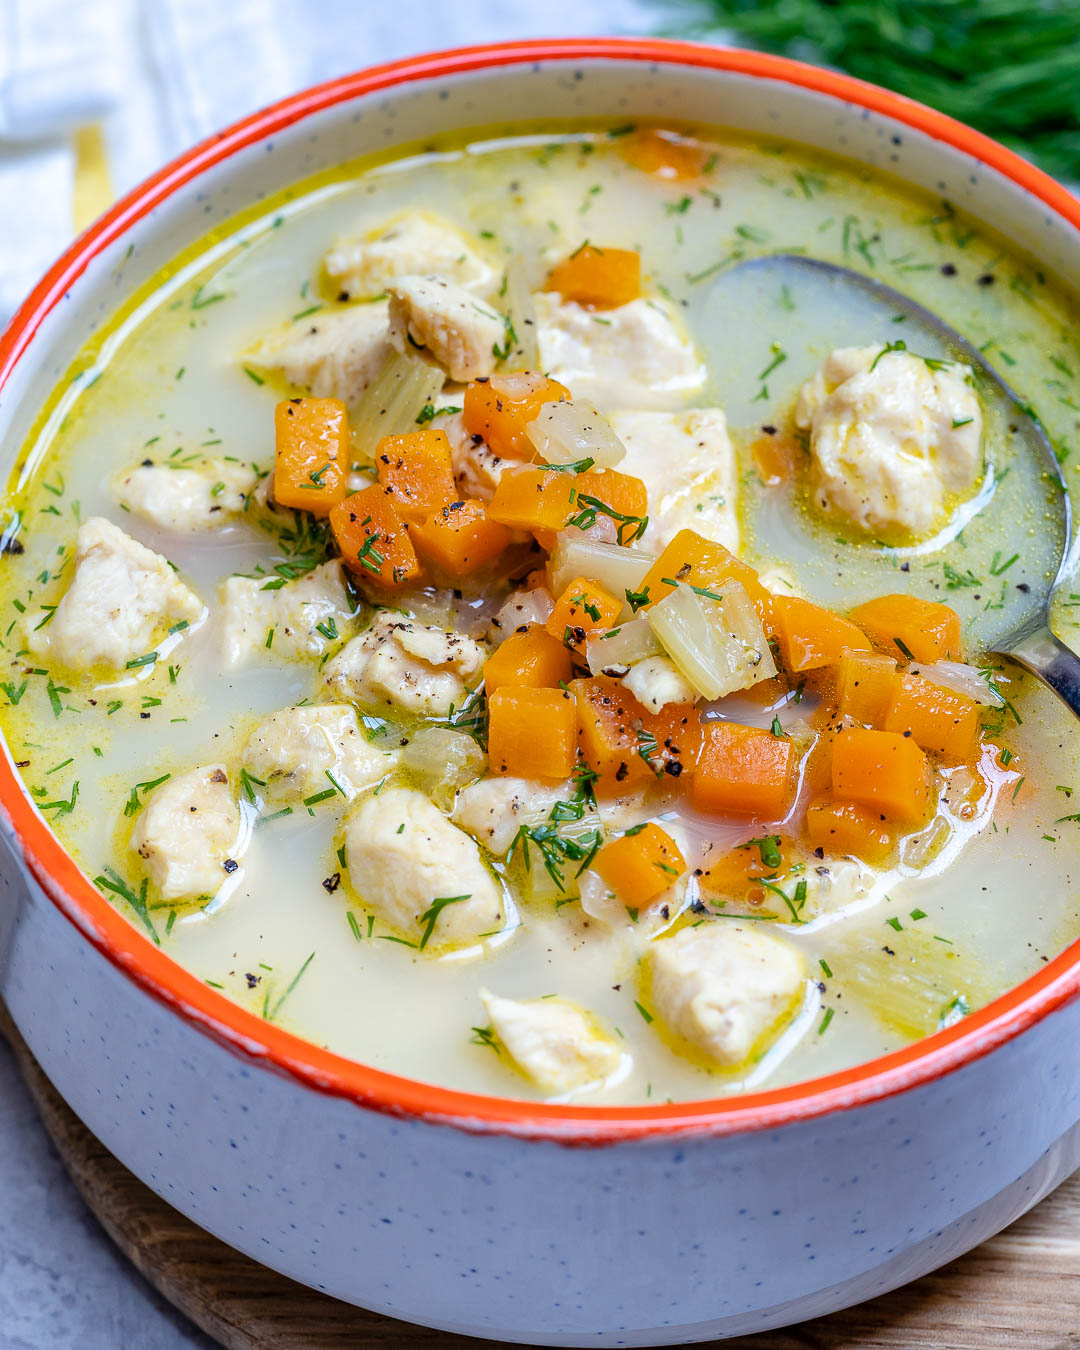 Greek Chicken Soup For A Budget Friendly Clean Eating Dinner Idea Clean Food Crush